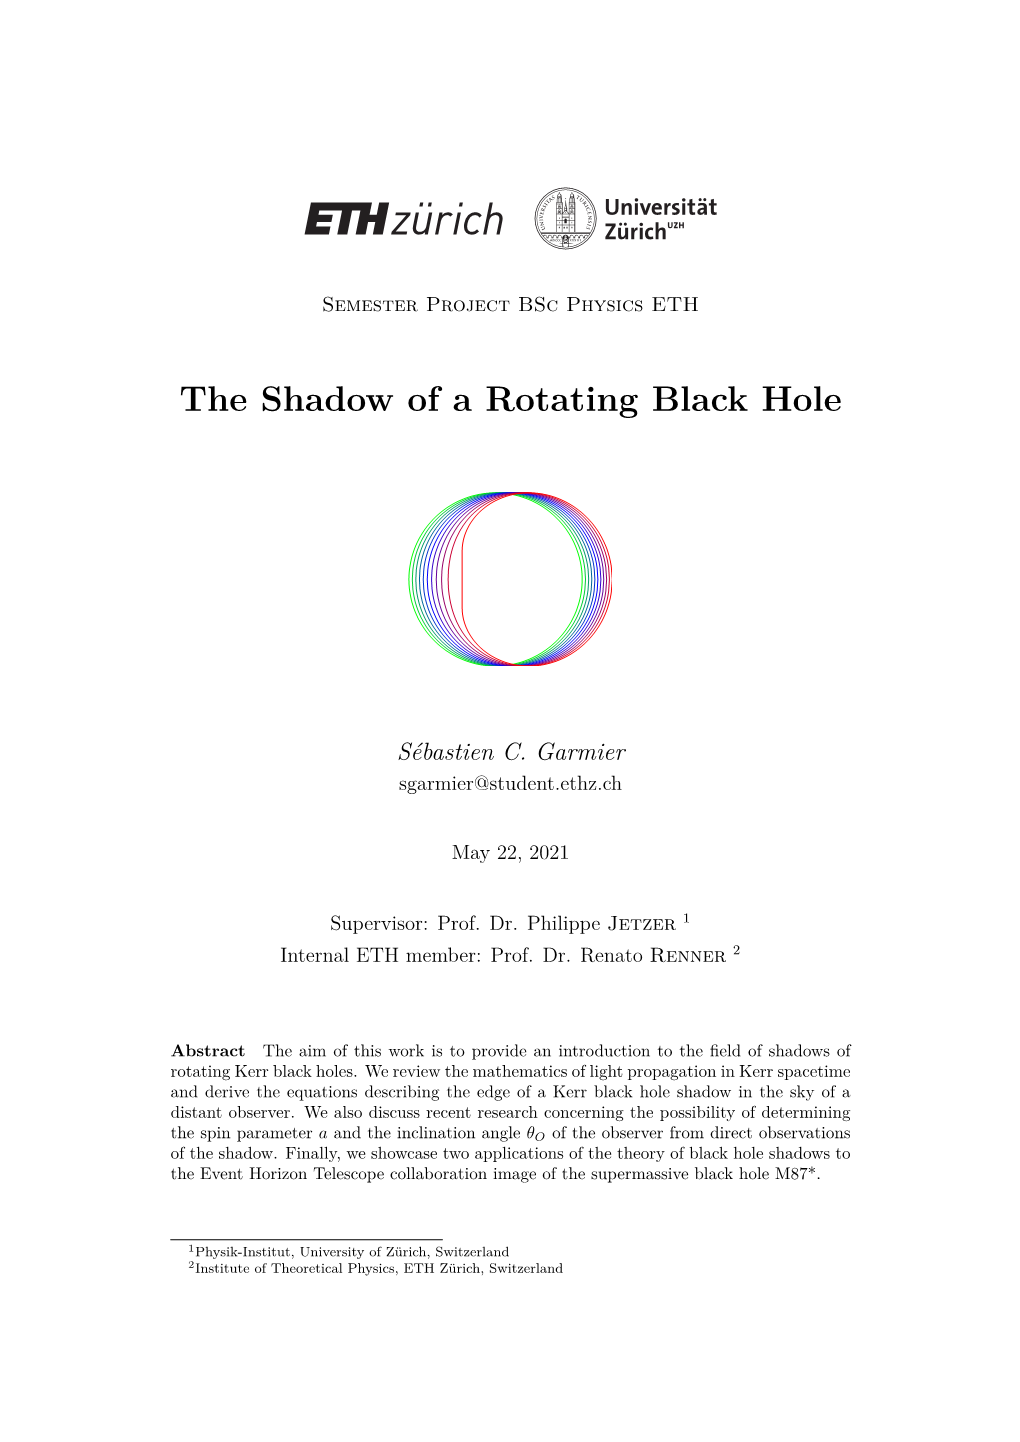 The Shadow of a Rotating Black Hole